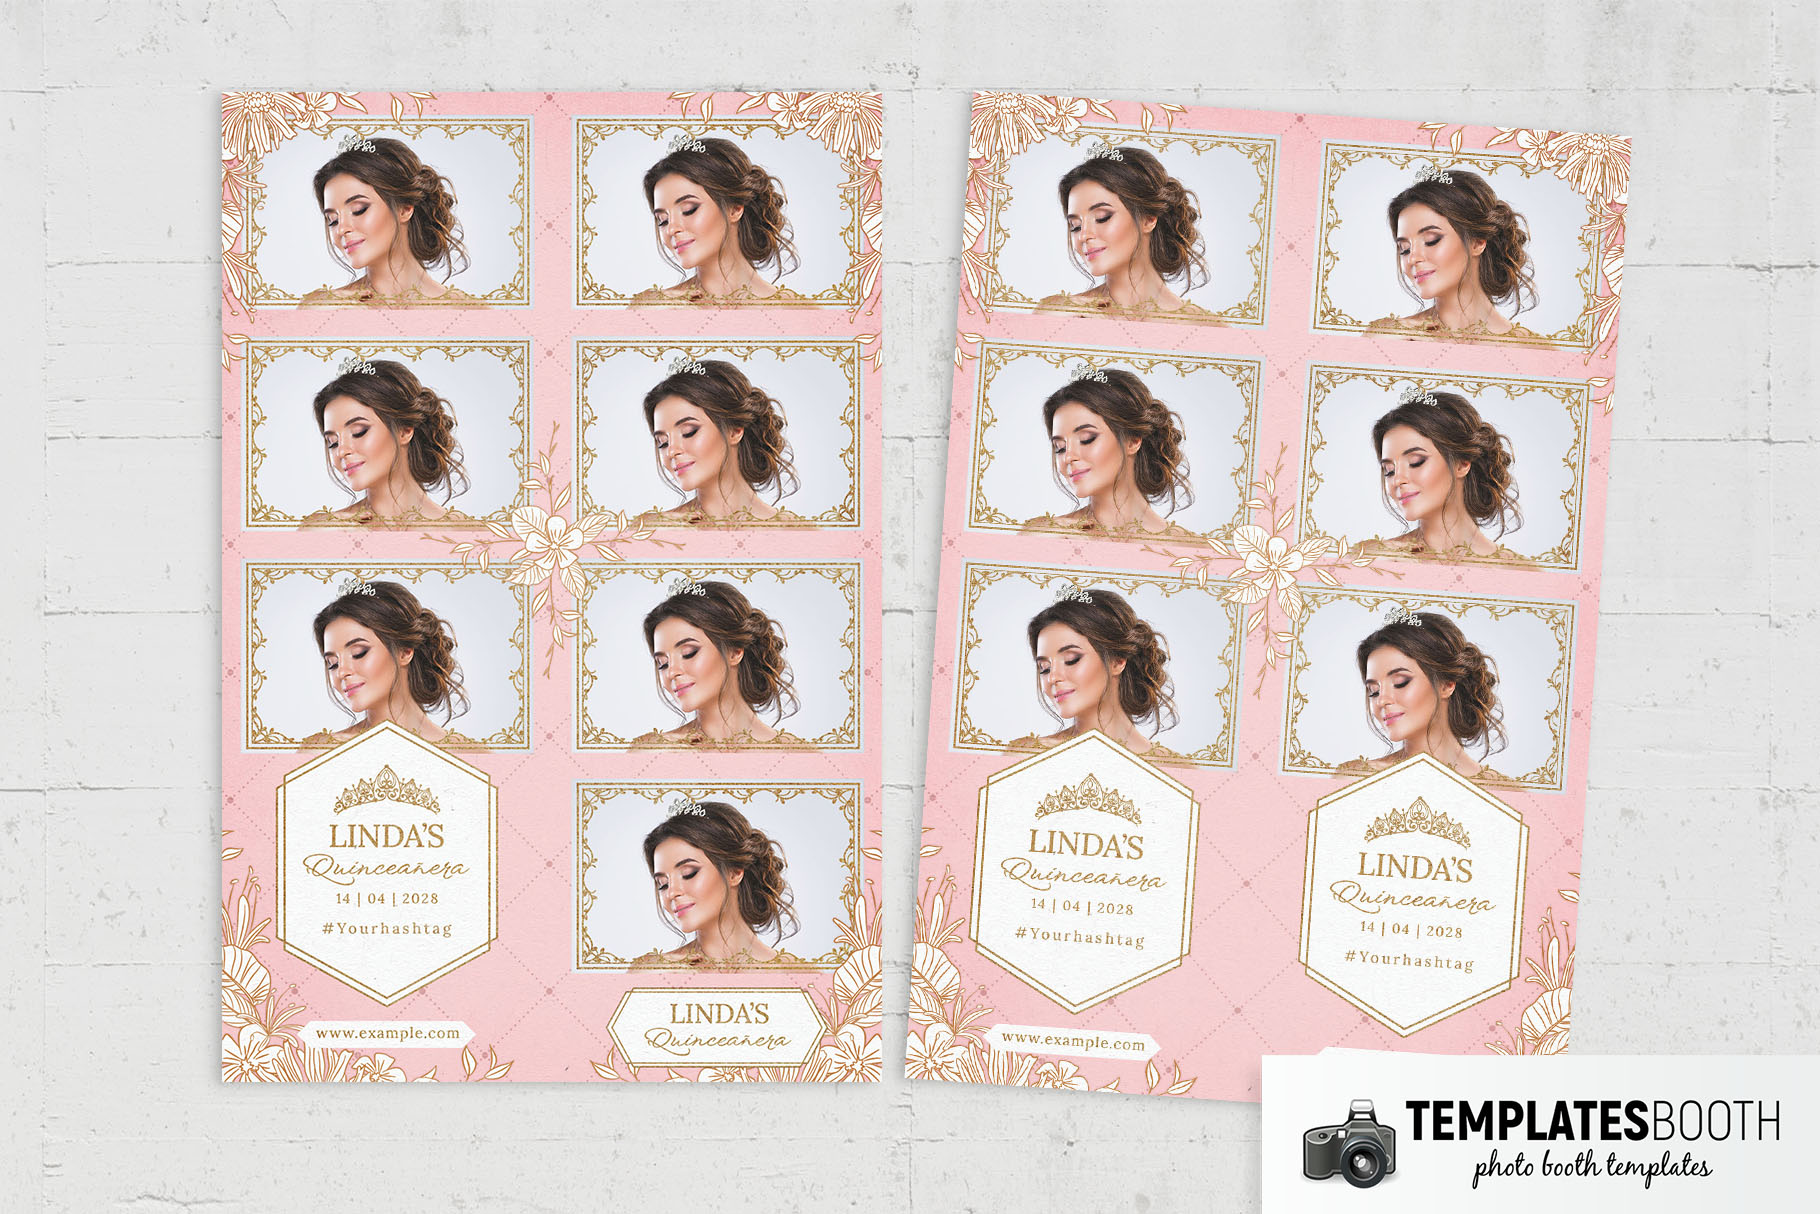 Quinceañera Photo Booth Template